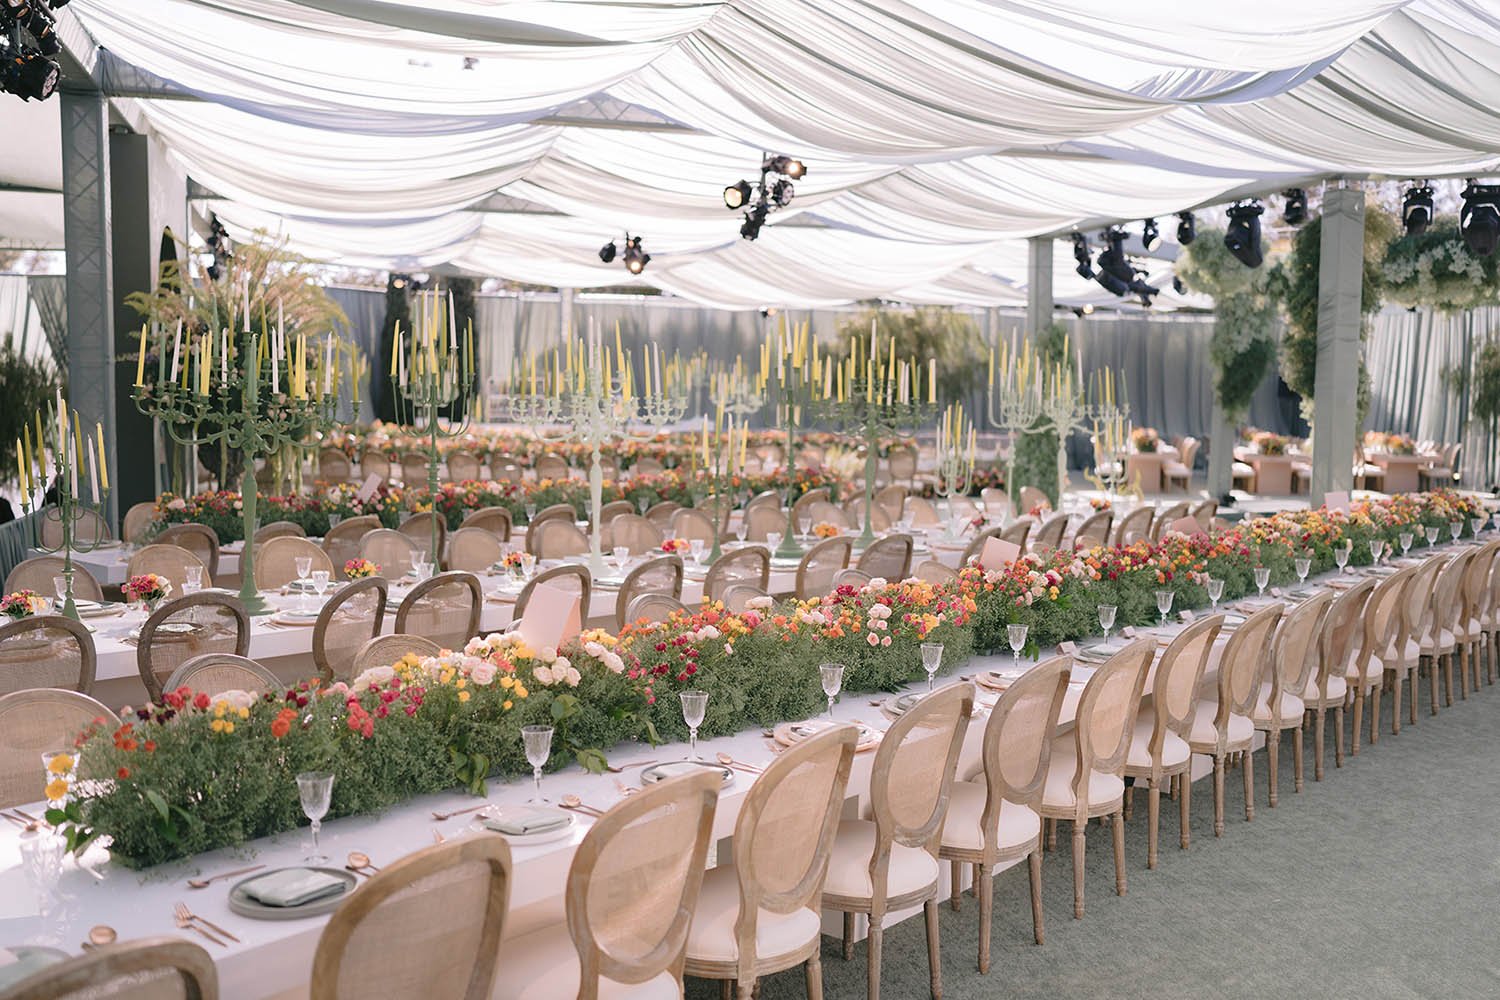 Colorful spring wedding floral color palette - an LA reception designed by Eddie Zaratsian Lifestyle and Design